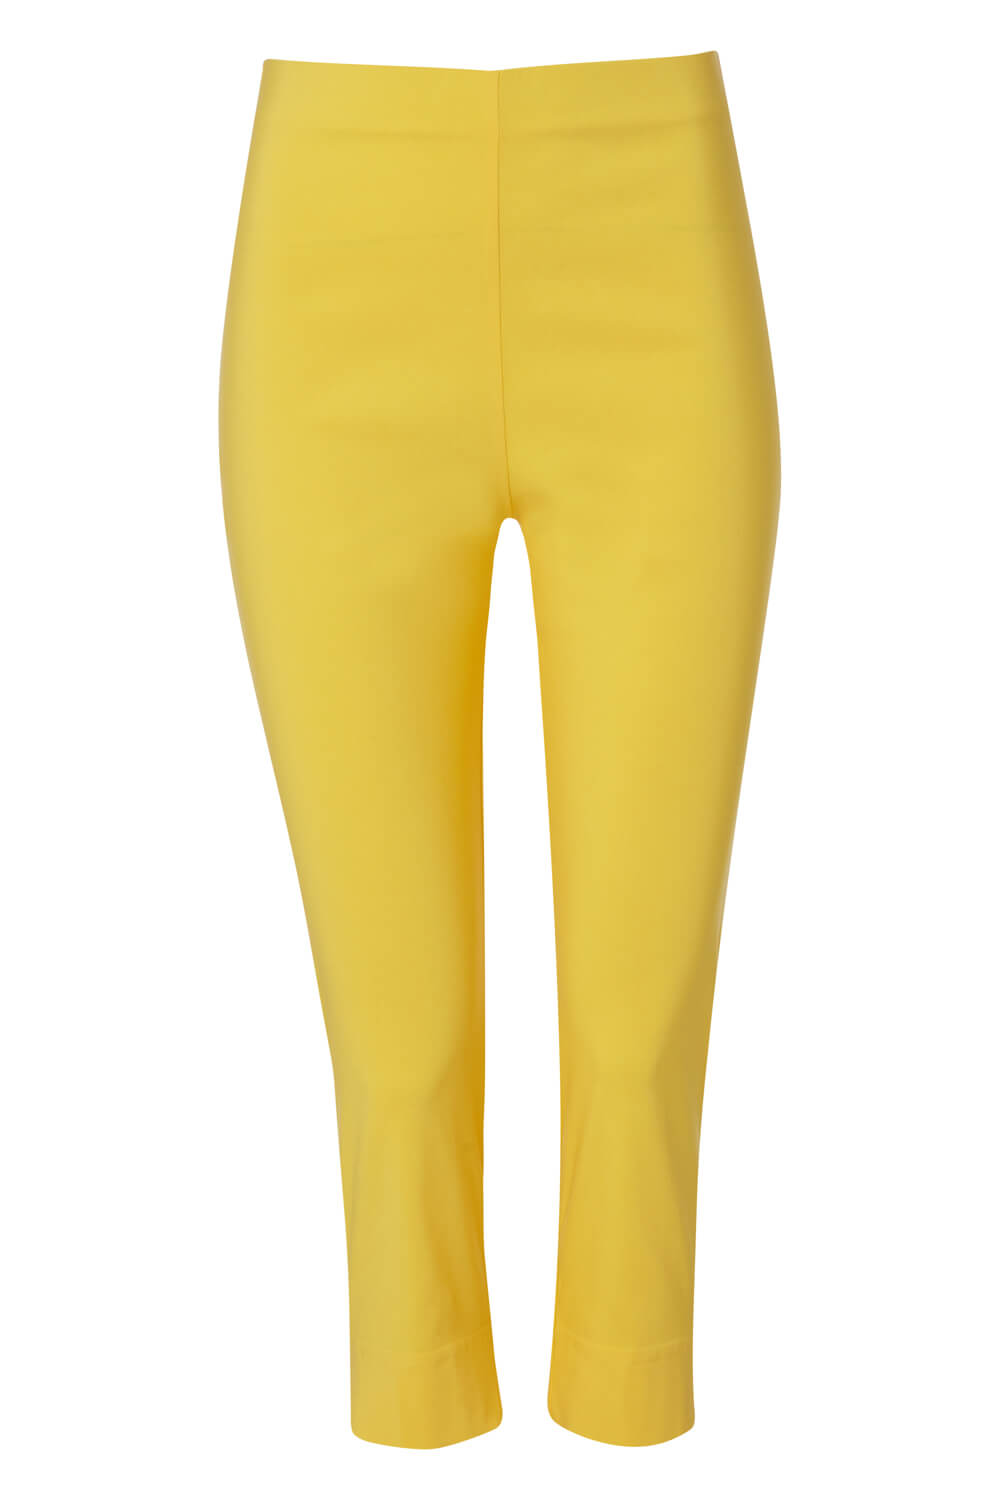 Light Yellow Cropped Stretch Trouser, Image 5 of 5